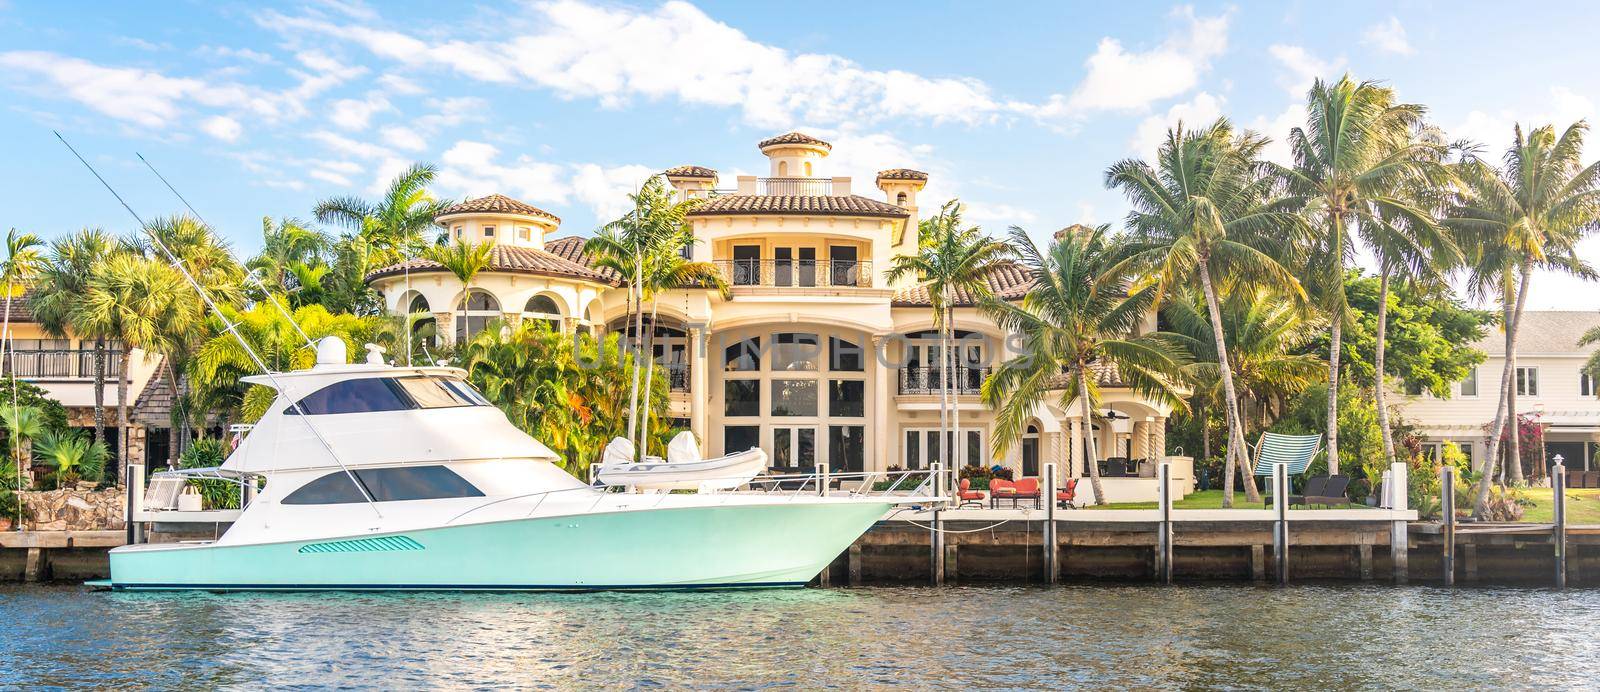 Luxury Waterfront Mansion in Fort Lauderdale Florida by Mariakray